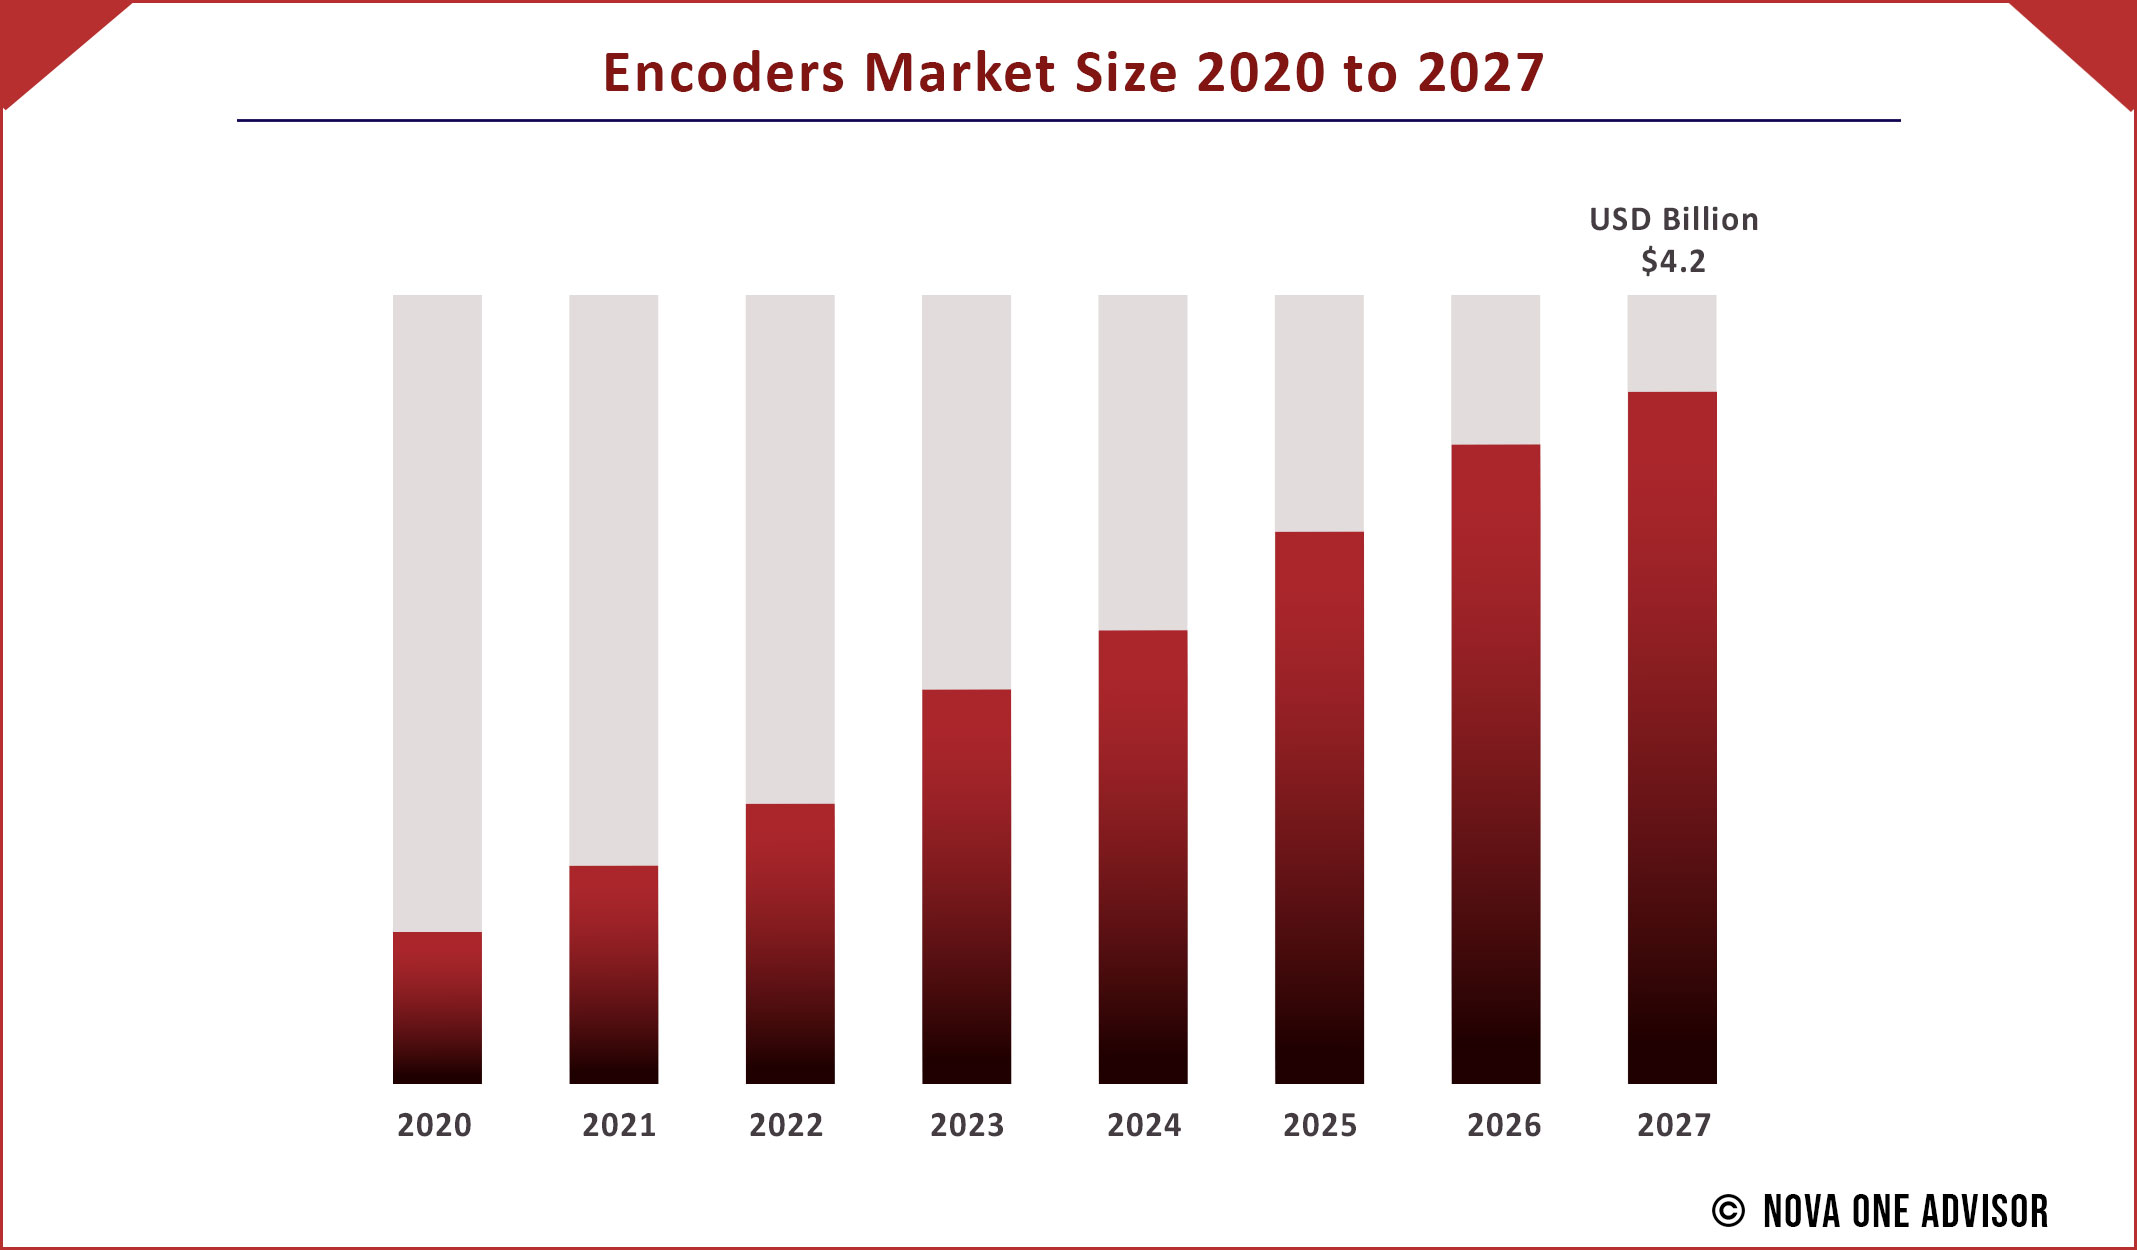 Encoders Market Size 2020 to 2027